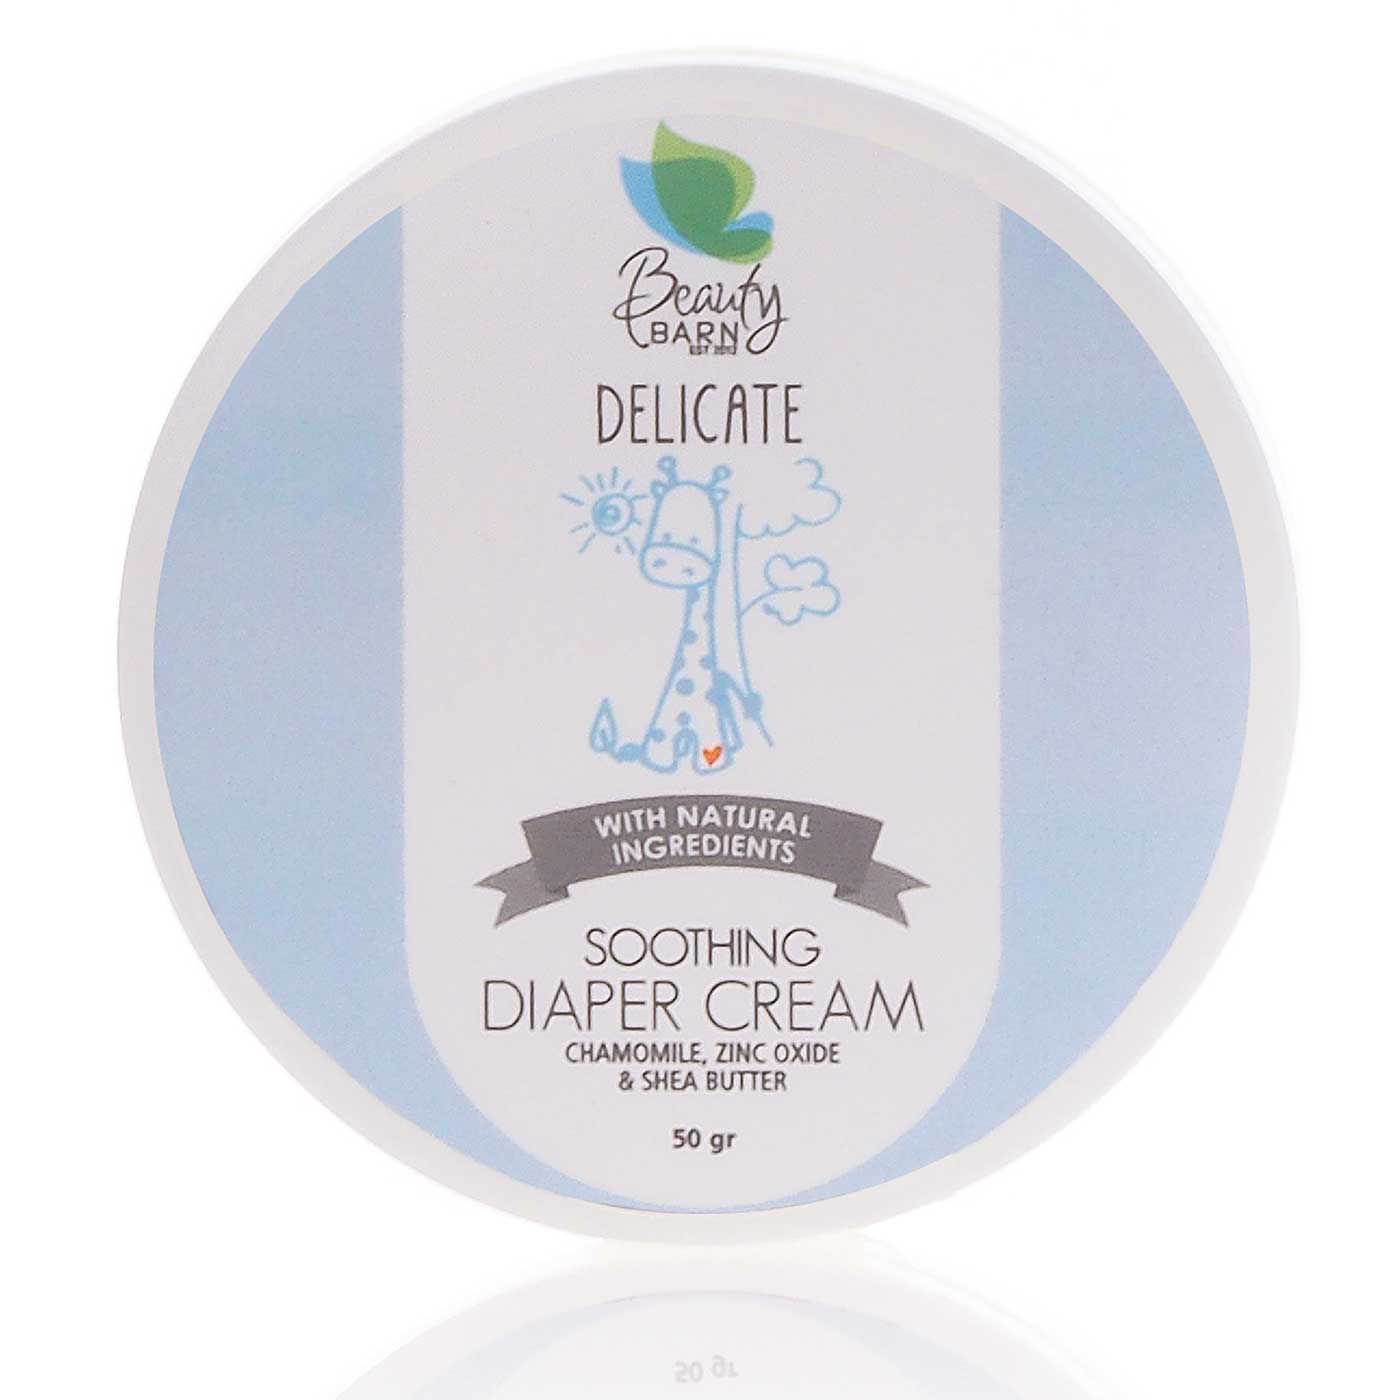 Beauty Barn Delicate - Soothing Diaper Cream 50g - 1